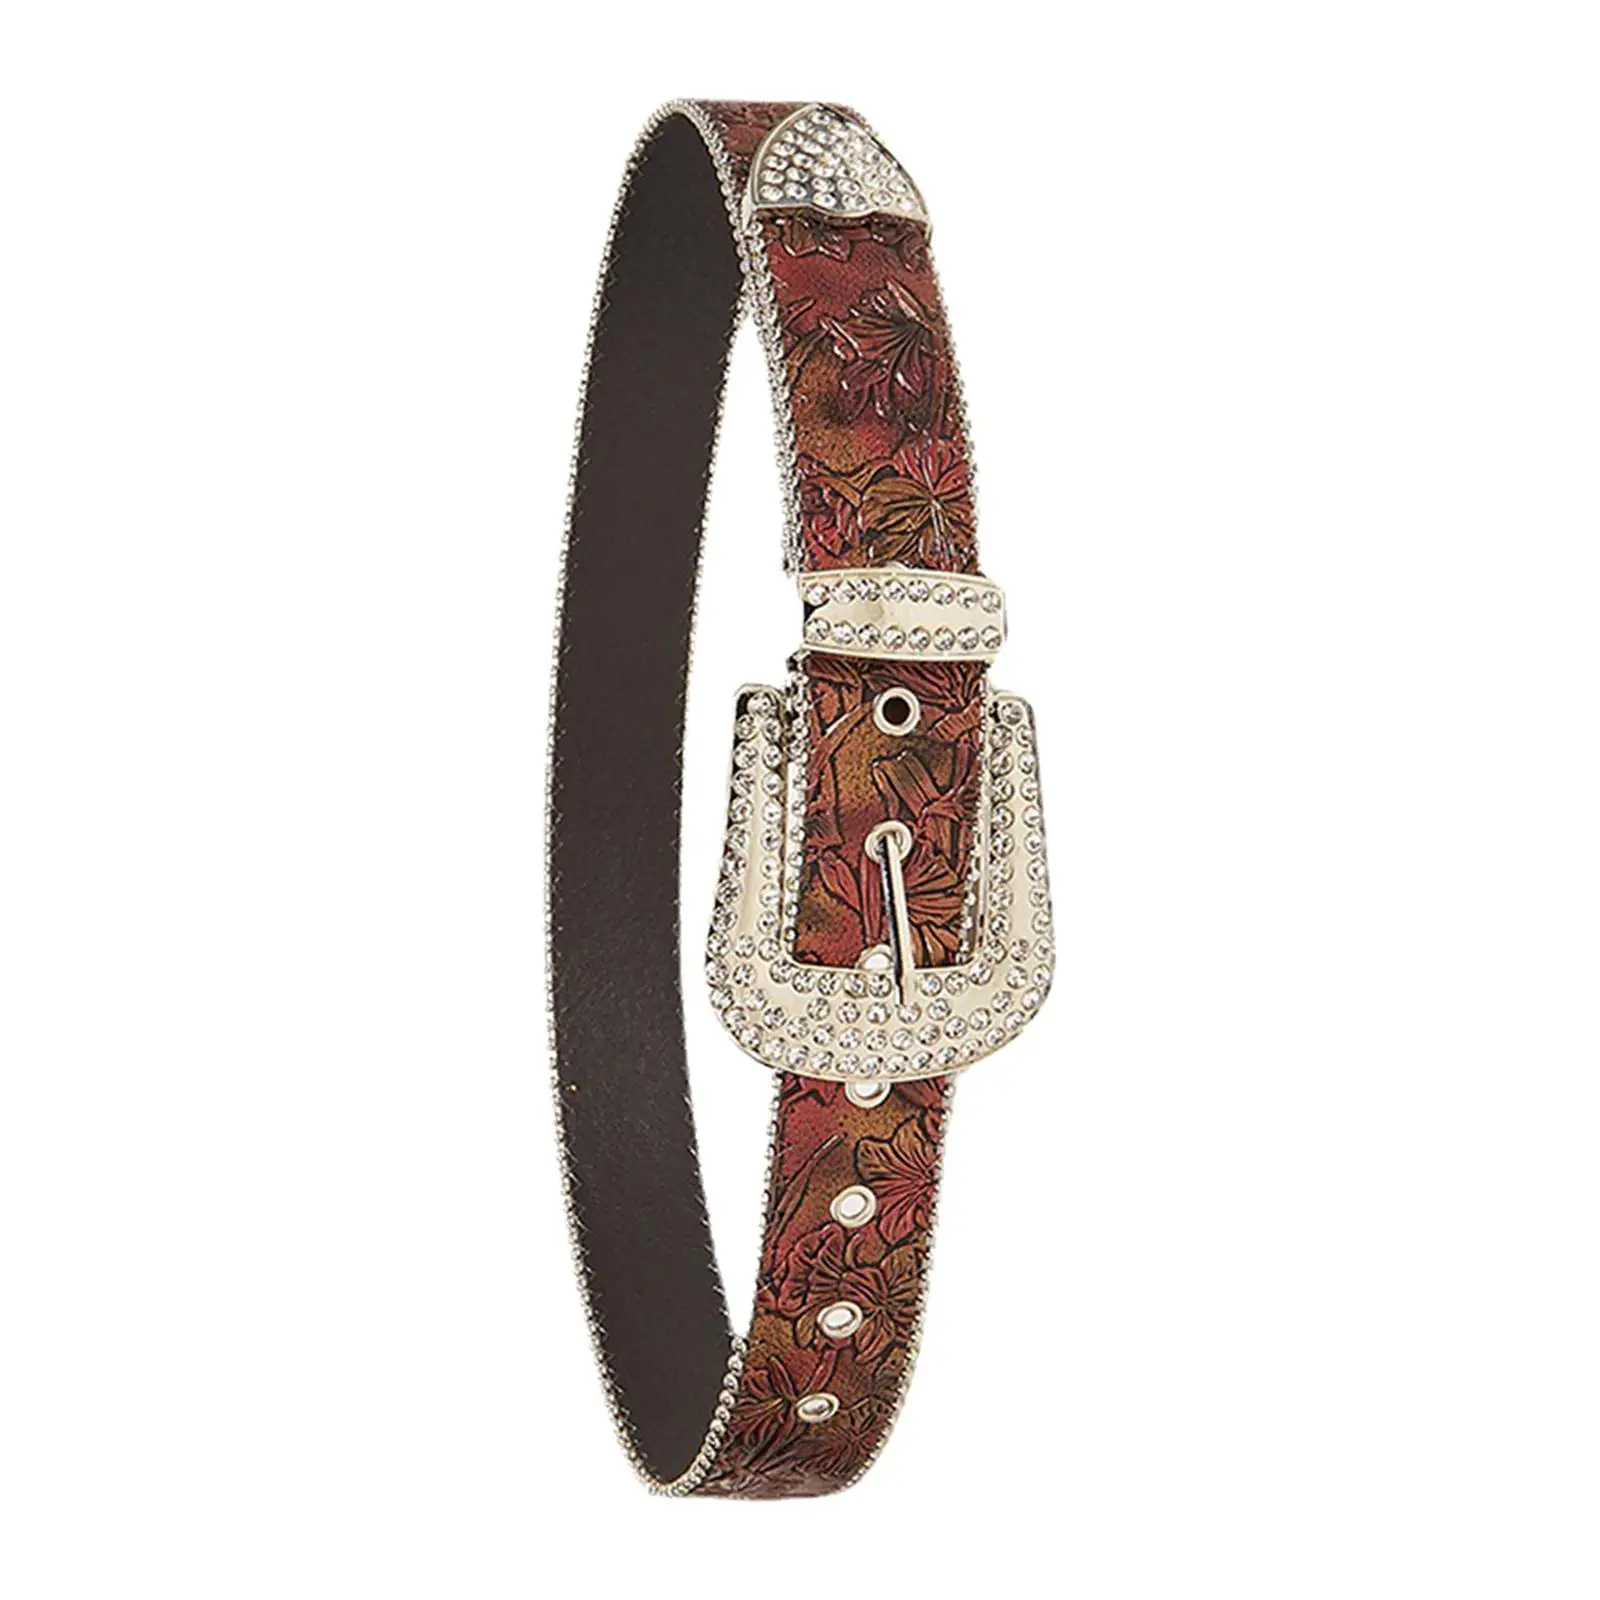 Women Rhinestone Belt Waist Strap Western Cowgirl Clothes Accessories with Buckle Fashion Waistband Leather Belt for Dress Pants